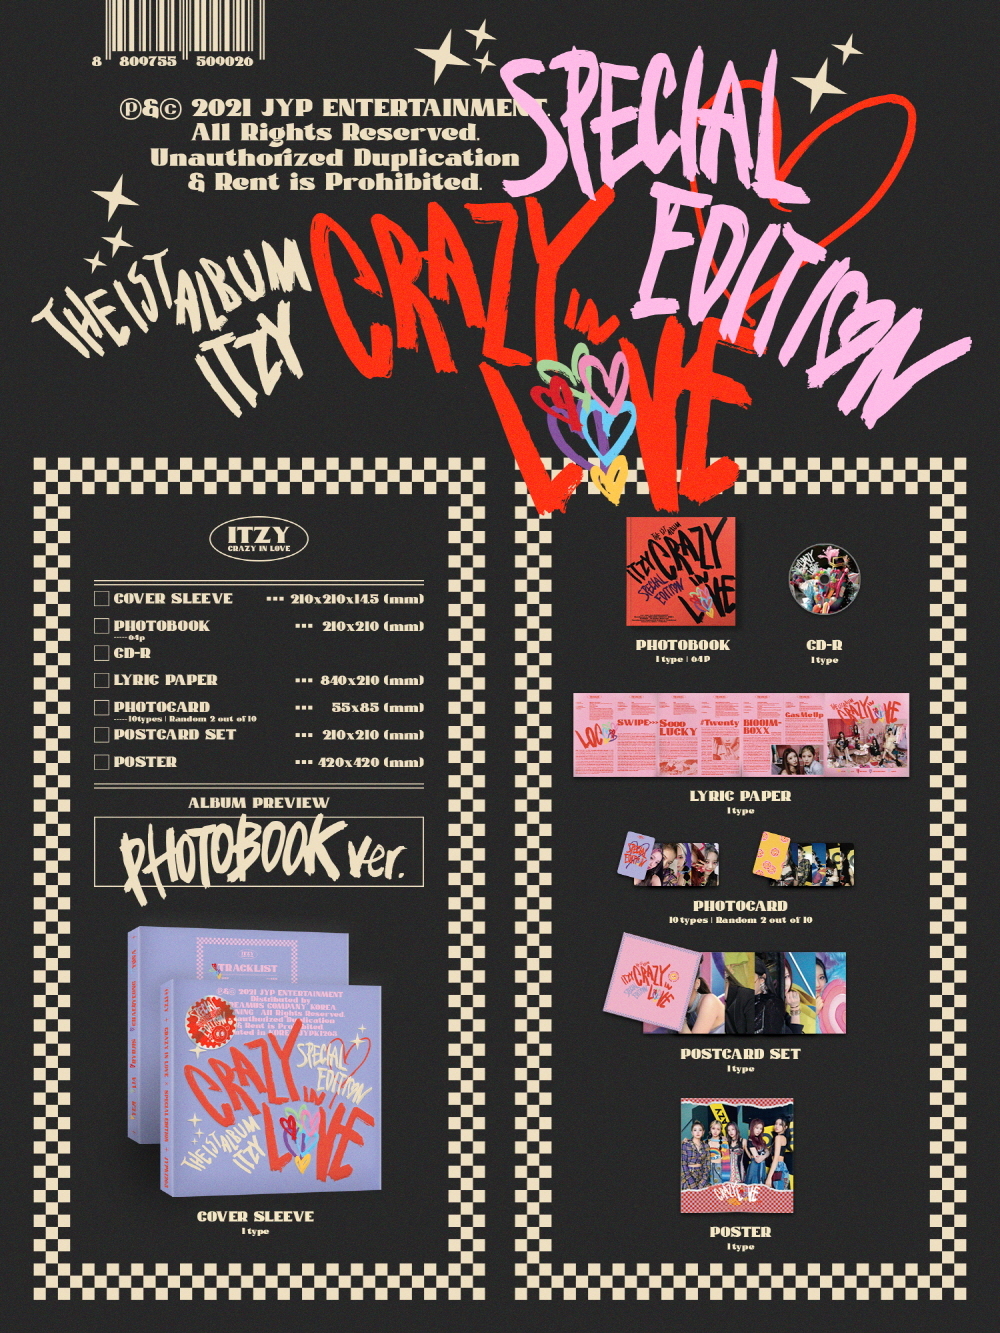 ITZY - The 1st Album [CRAZY IN LOVE] Special Edition (PHOTOBOOK ver.) ITZY The 1st Album CRAZY IN LOVE  Special Edition PHOTOBOOK